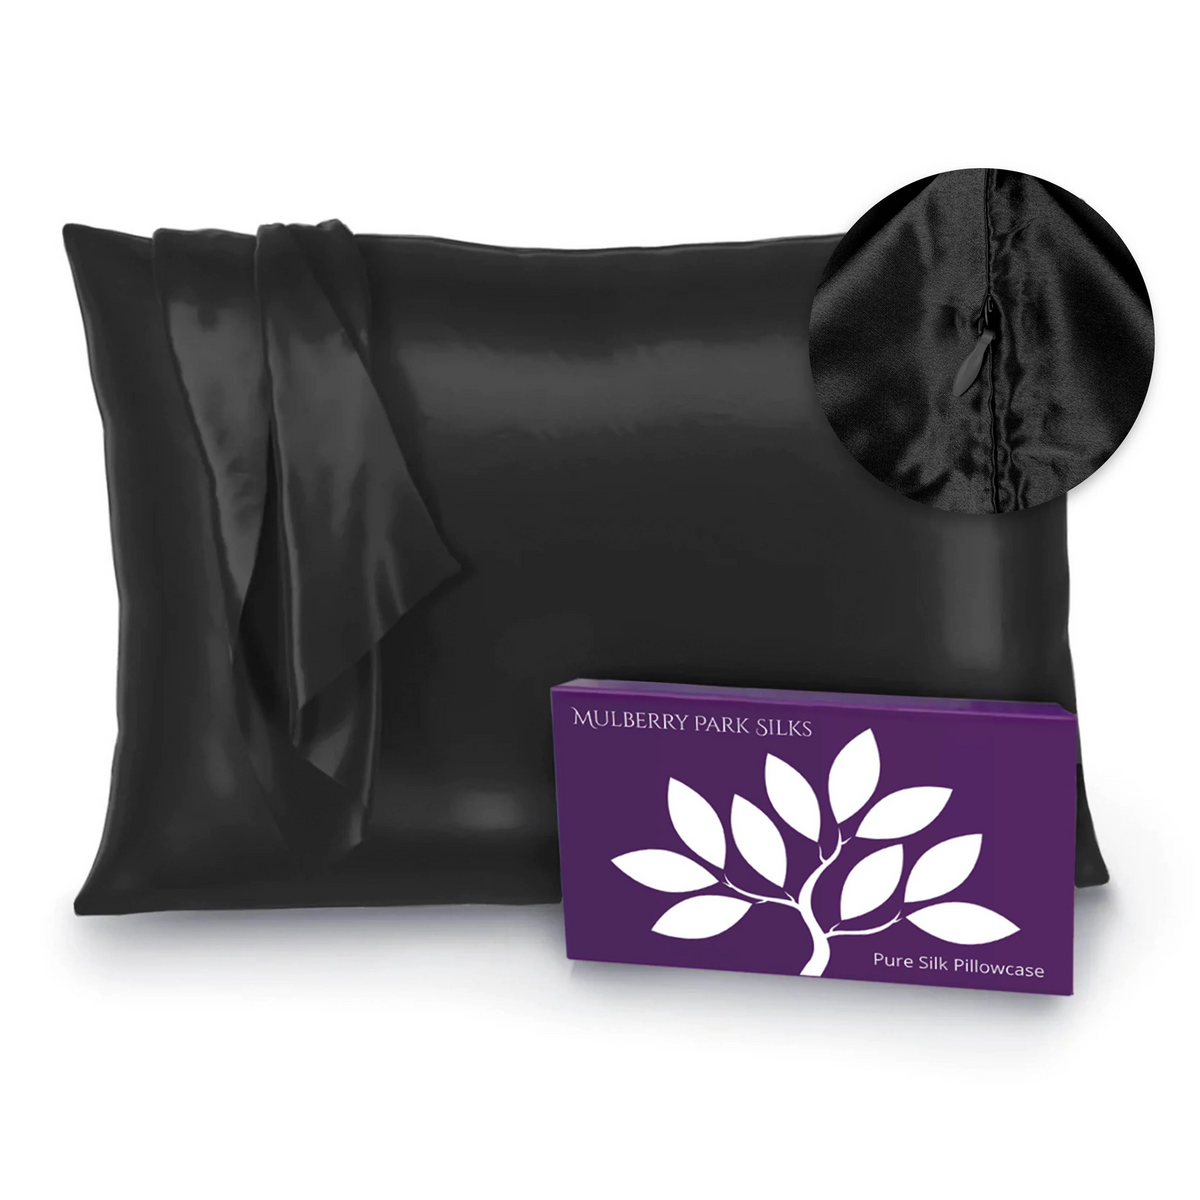 Black Silo Image of Mulberry Park Silks Deluxe 22 Momme Pure Silk Pillowcase with Zipper Detail and Box